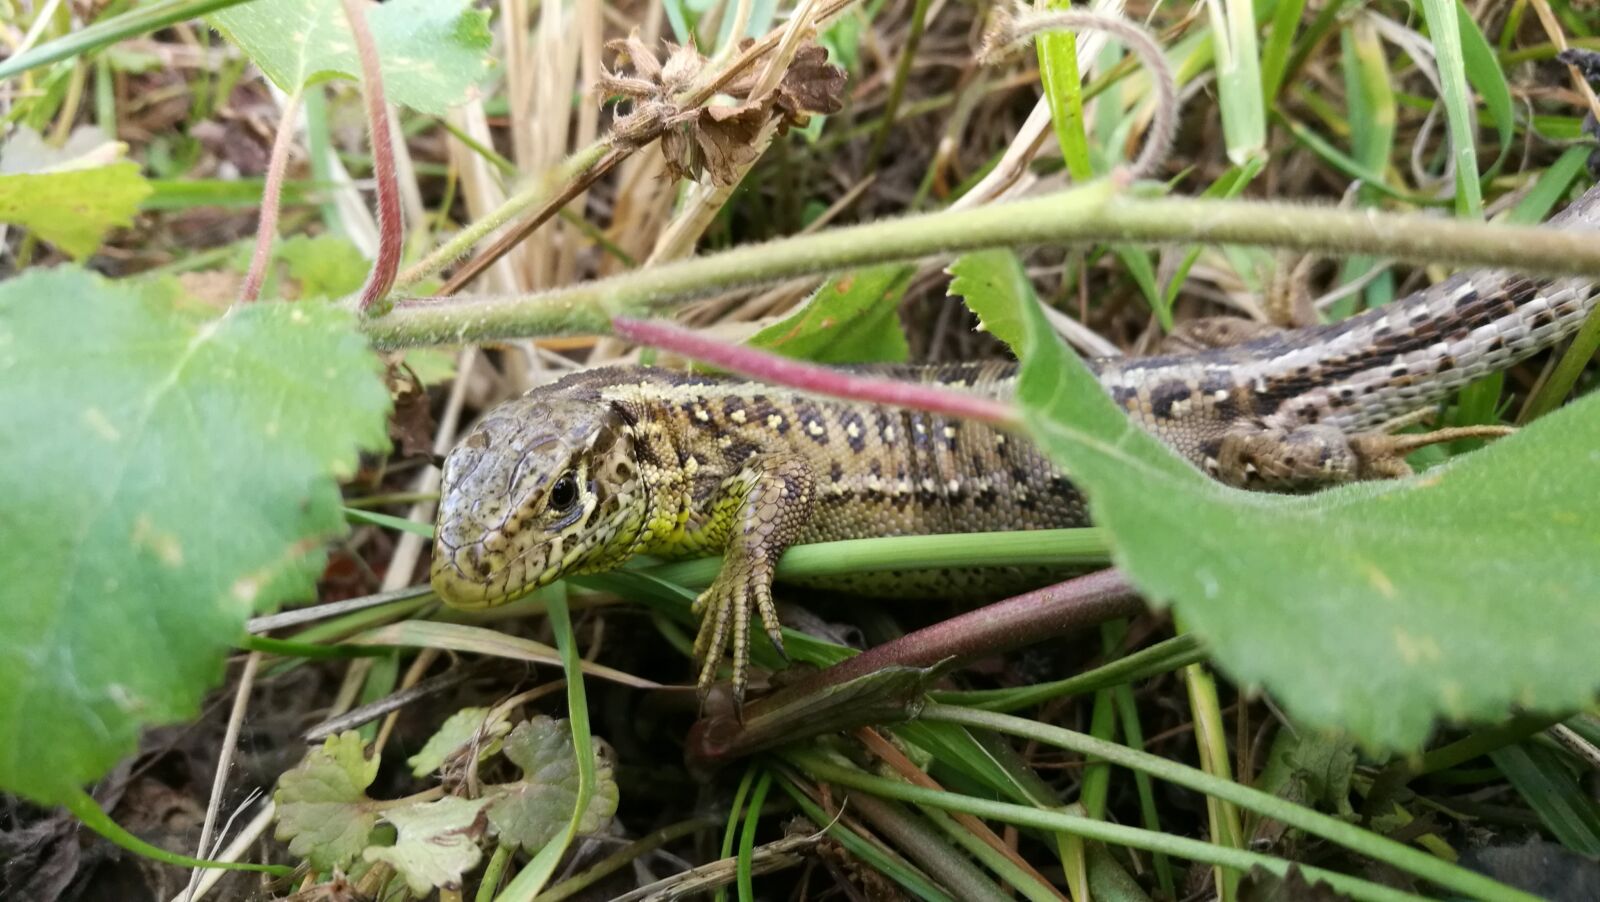 HUAWEI Honor 8 sample photo. The lizard, forest, reptiles photography